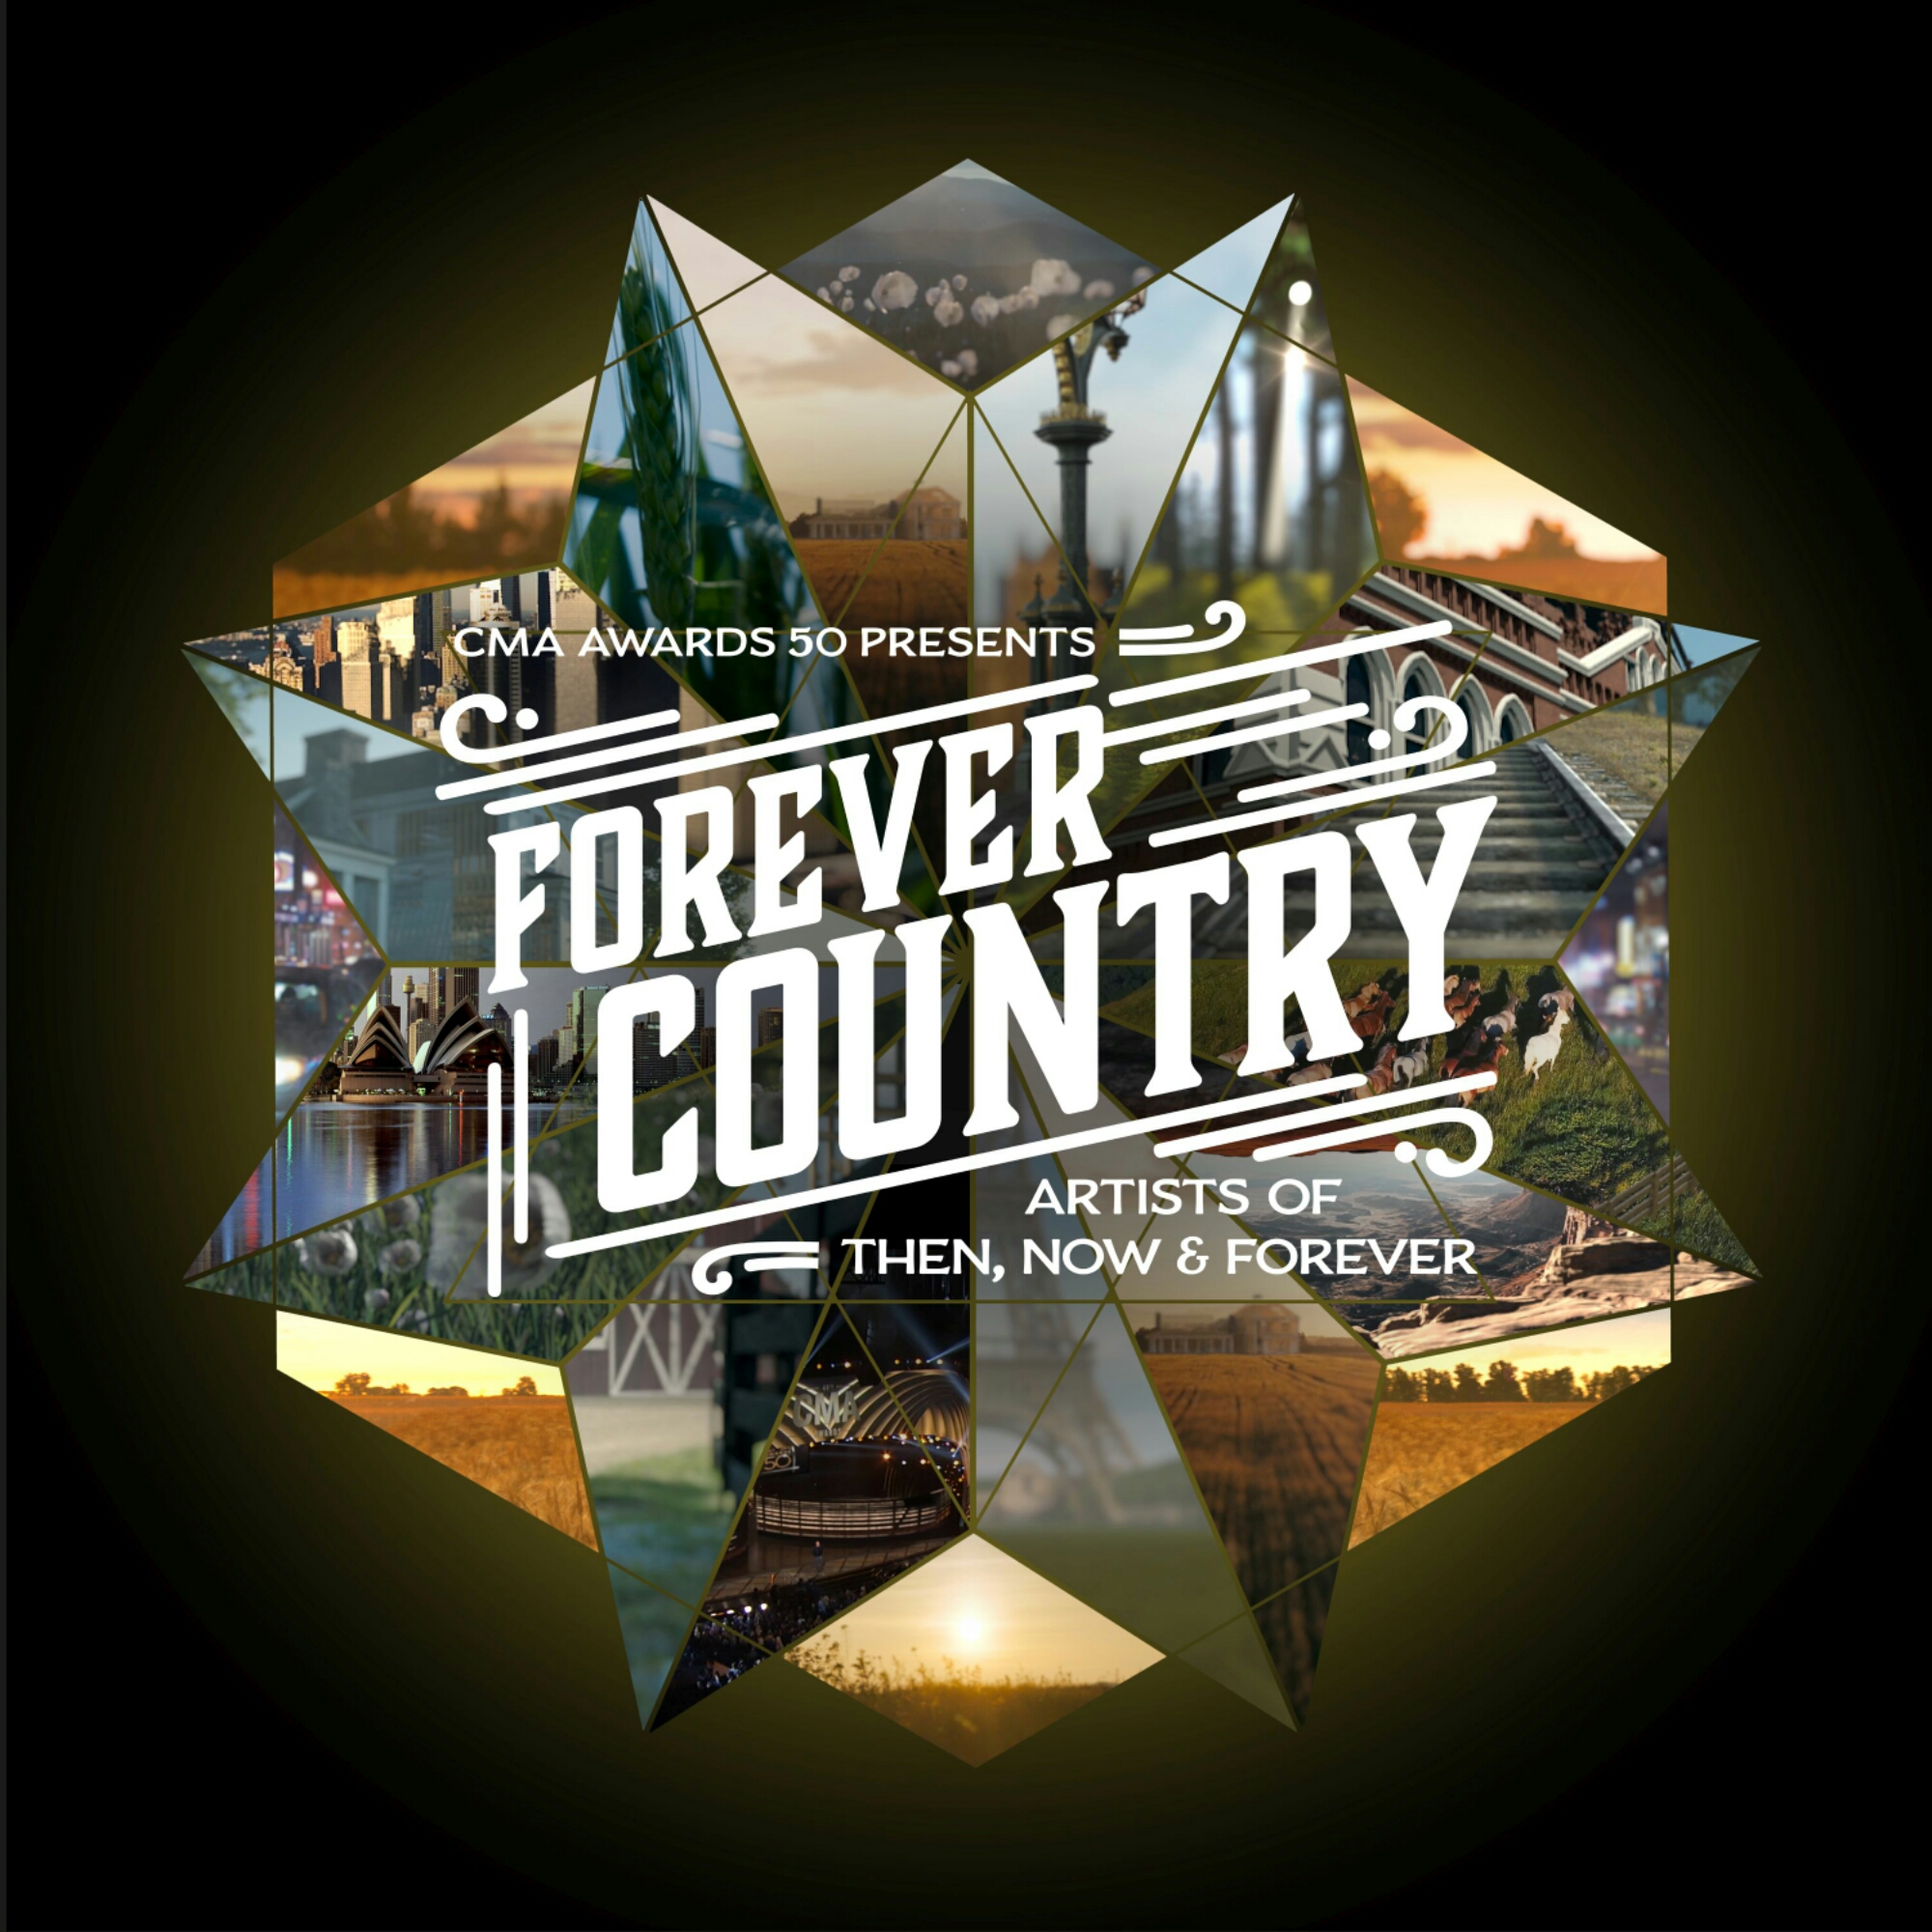 CMA ANNOUNCES THE LIST OF 30 CMA AWARDWINNING ACTS IN “FOREVER COUNTRY